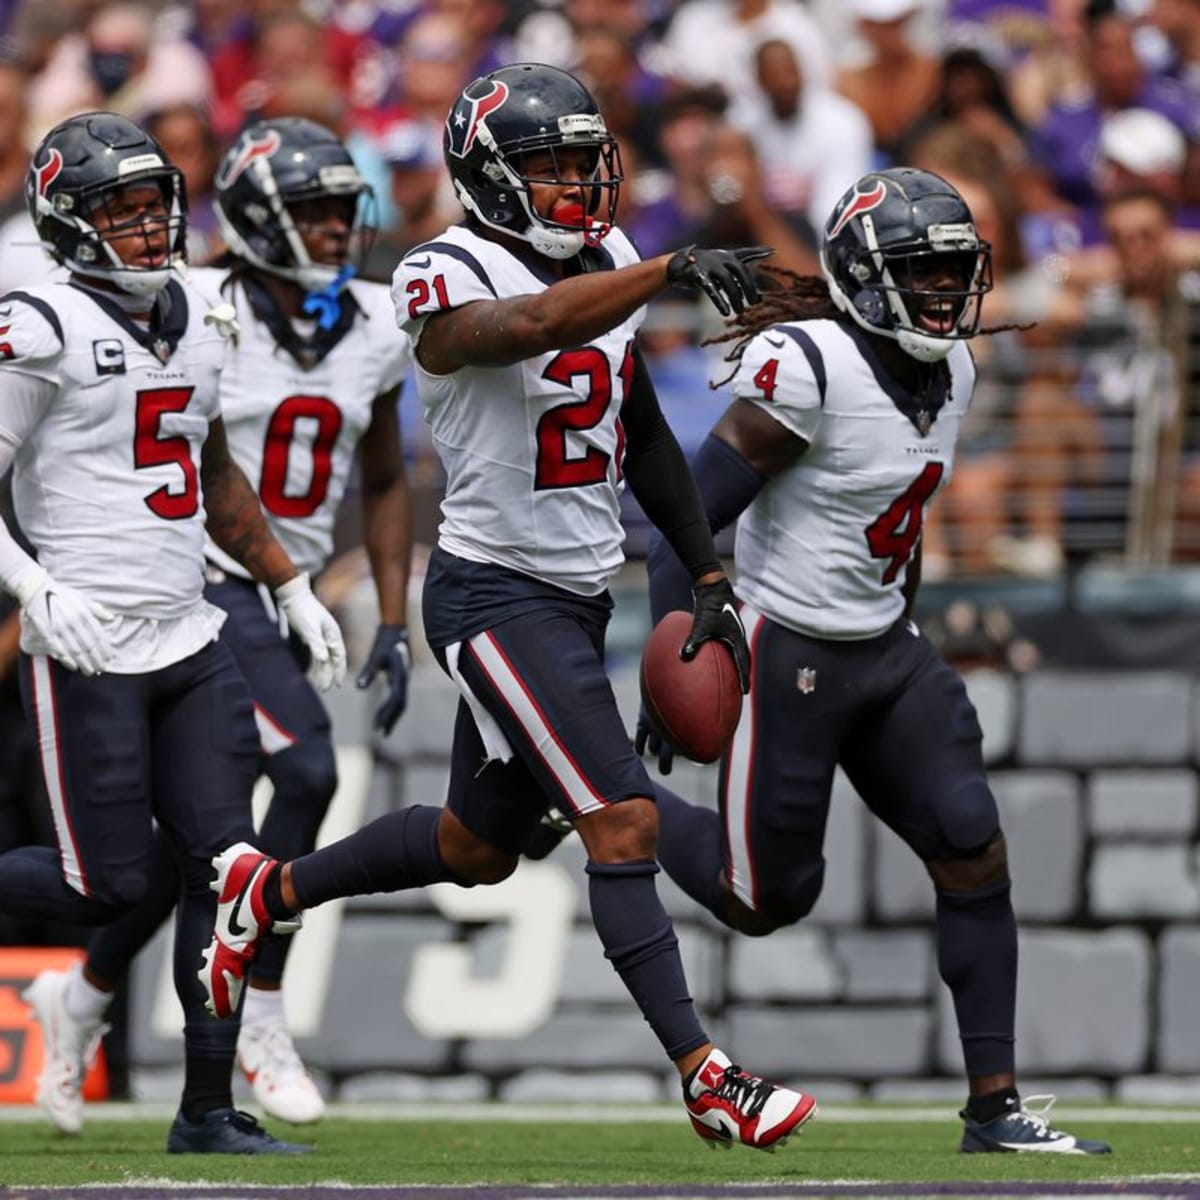 Texans vs. Colts: Best photos from NFL Week 2 in Houston